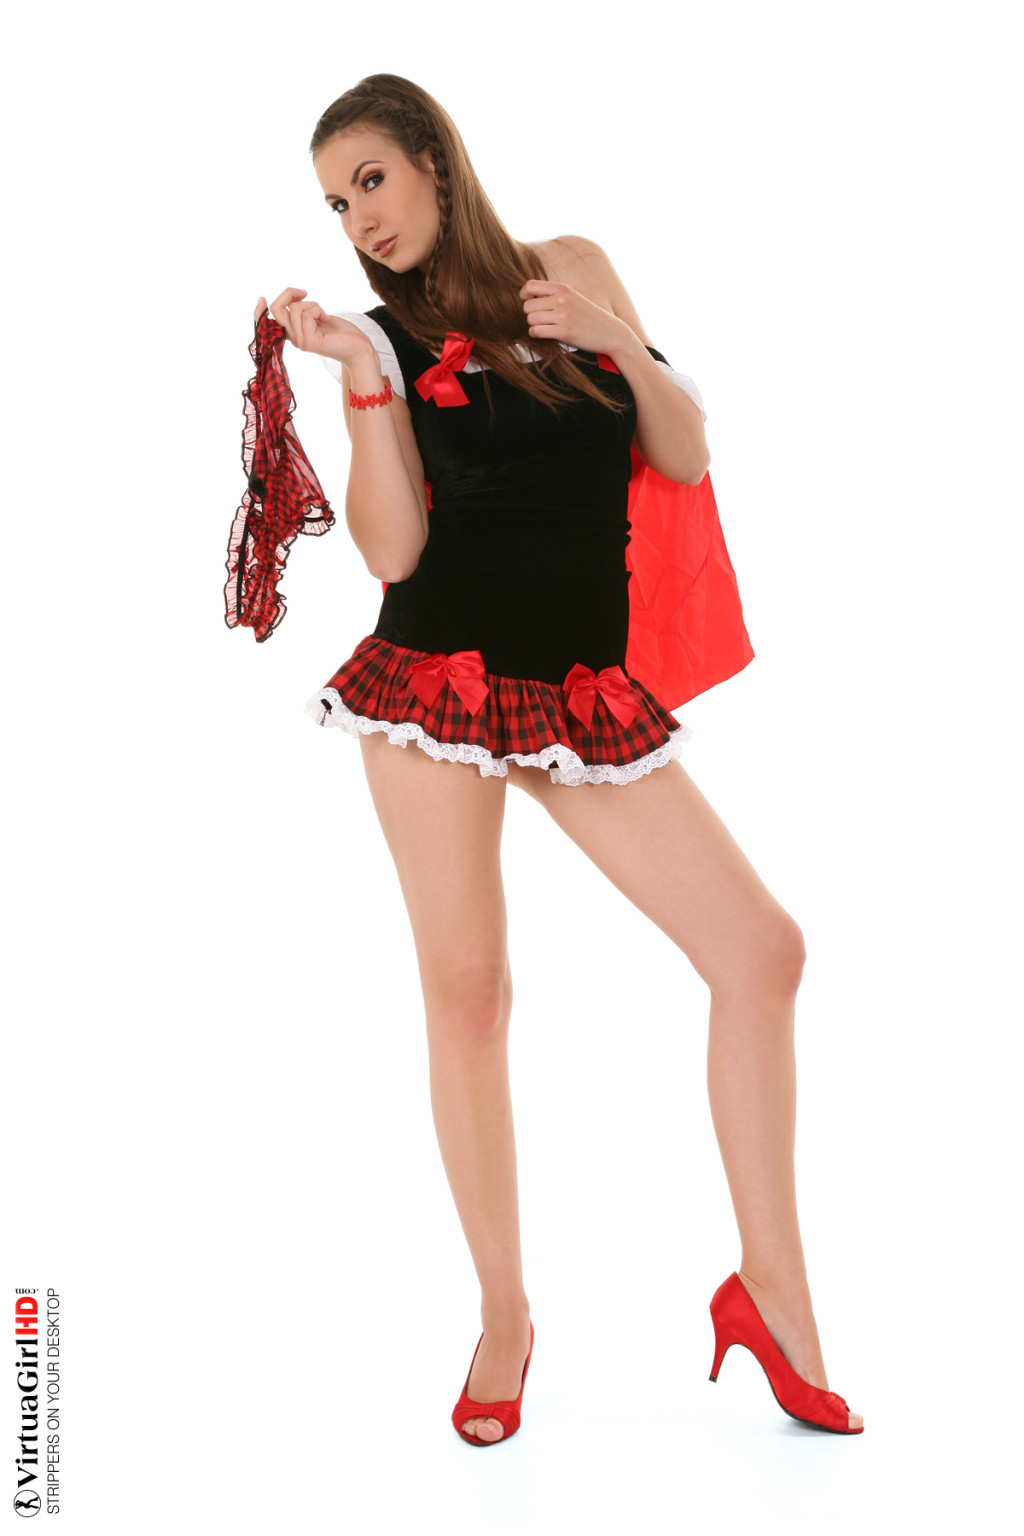 Little red riding hood takes off her panties #71318586